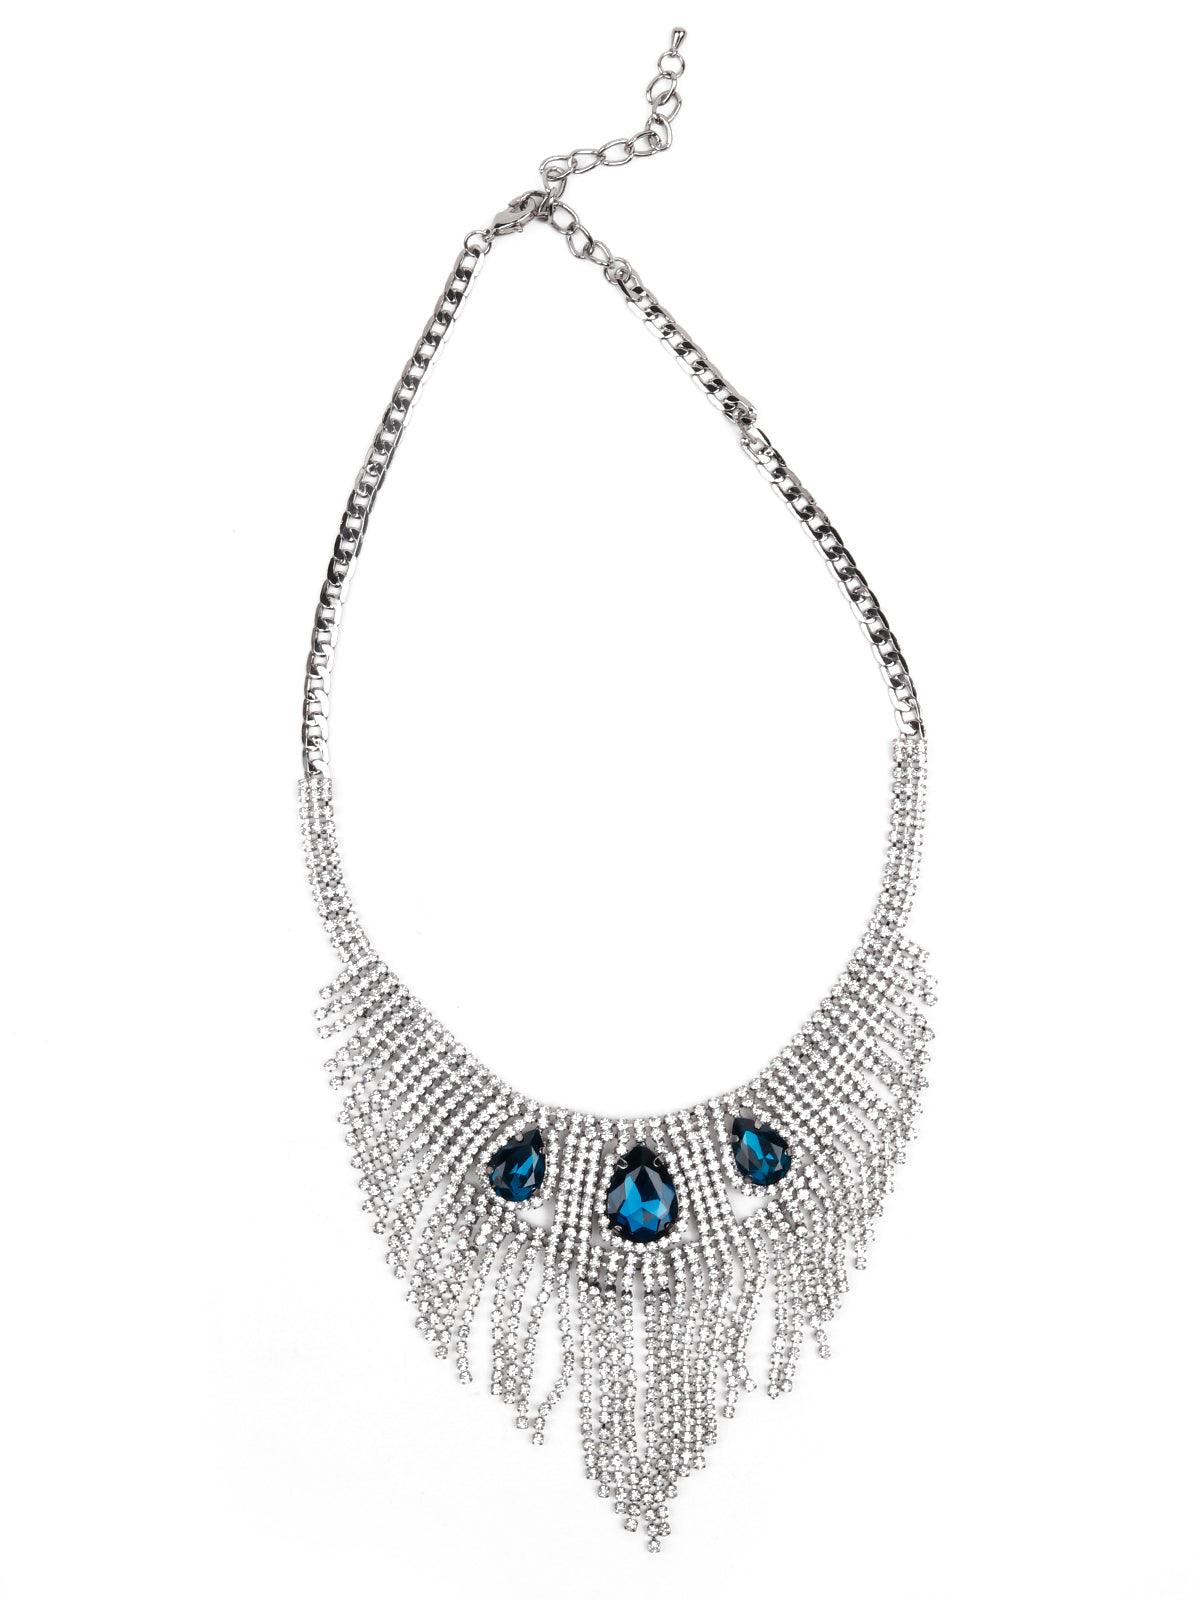 Women's Gorgeous Crystal Necklace Embellished With Blue Stone - Odette